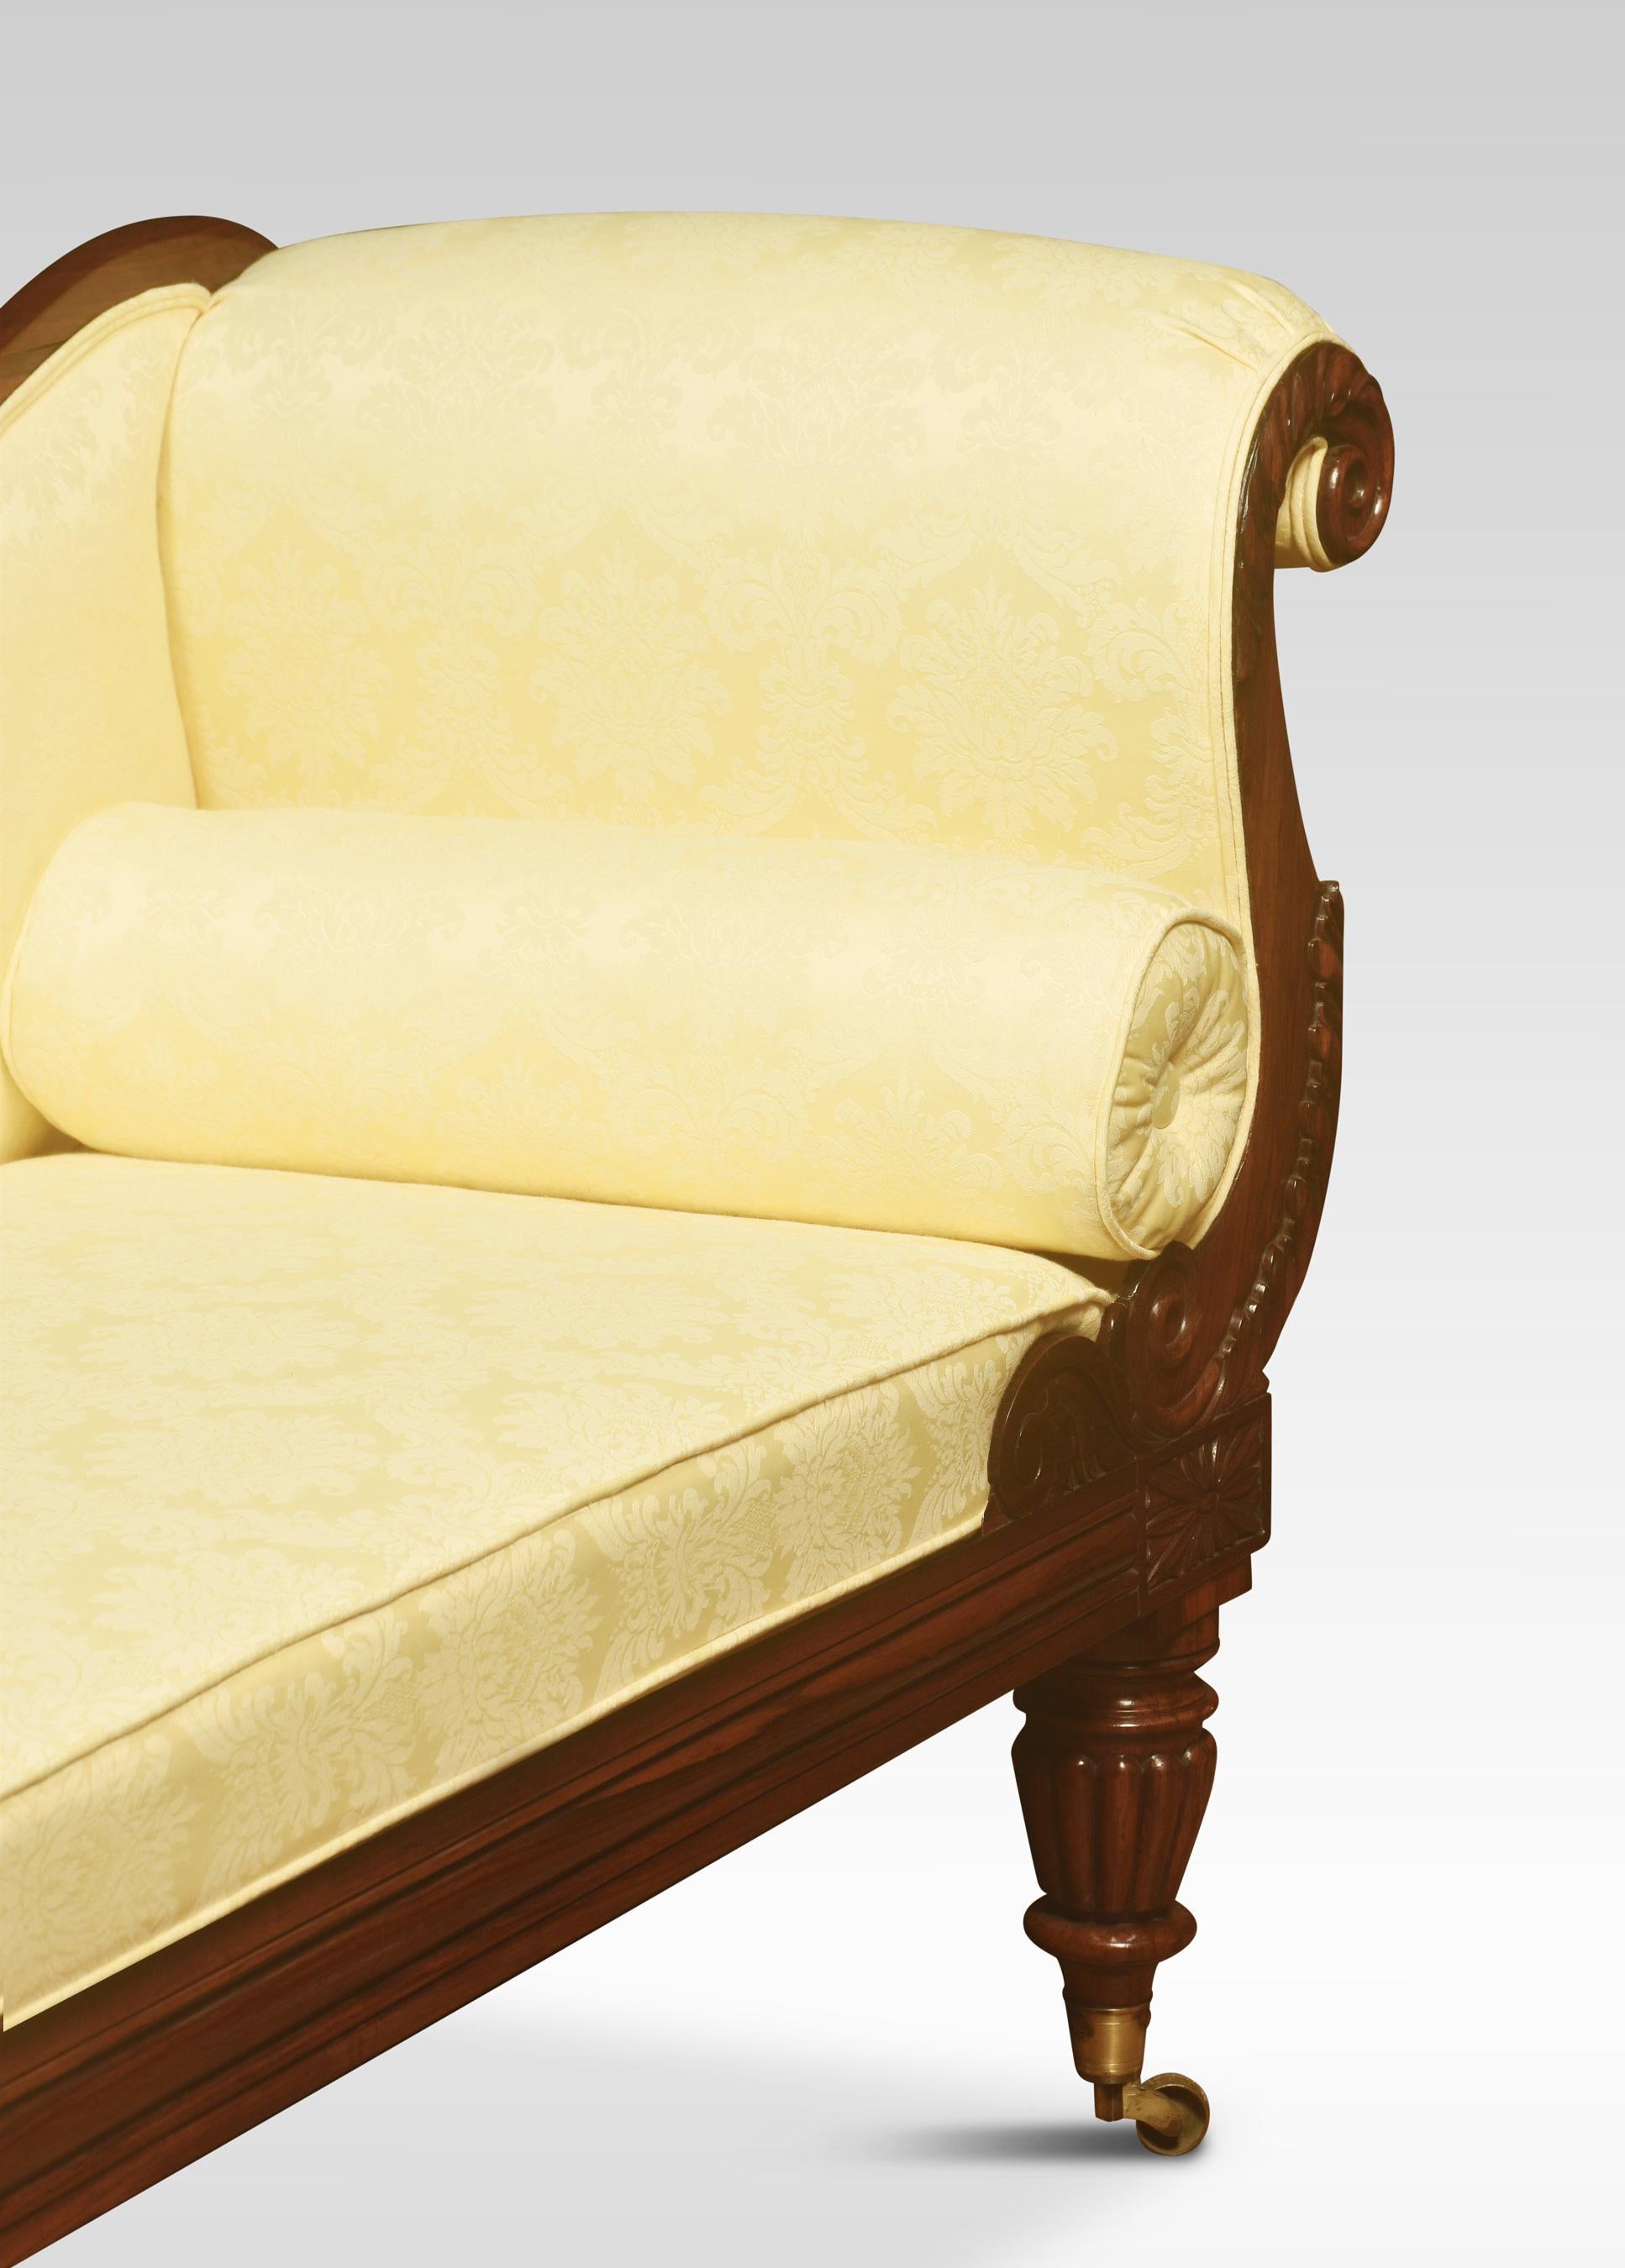 Egency rosewood chaise lounge, the carved backback rail which can be removed or used on either side, to the scroll arm and loose cushion seat, raised on conforming reeded turned legs terminating in brass caps and castors.
Dimensions
Height 36